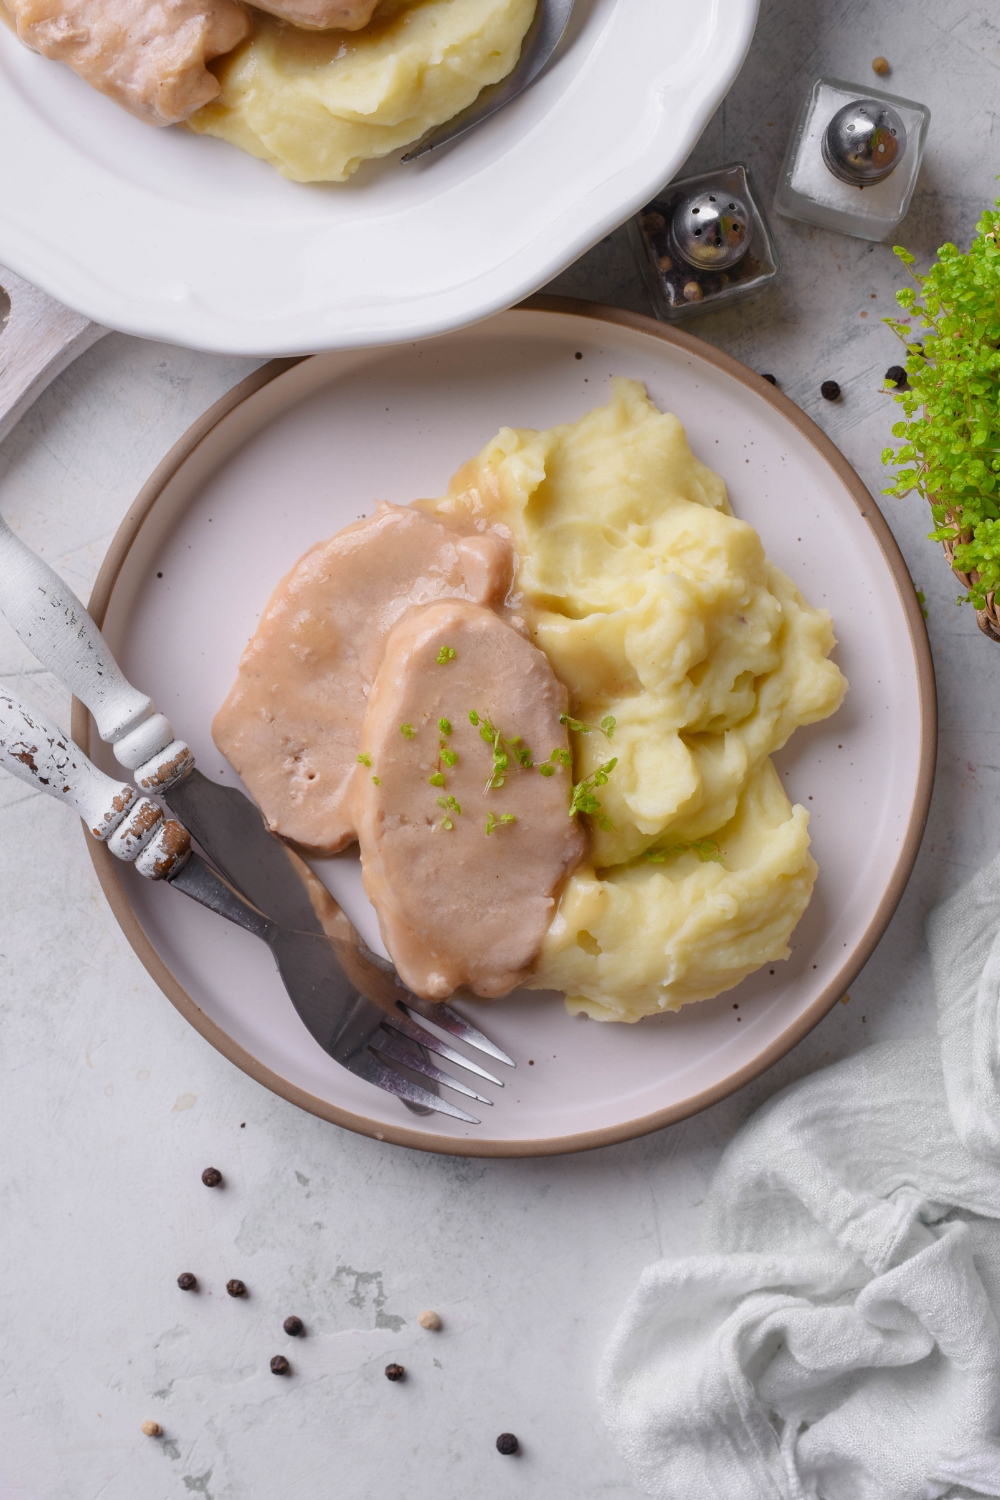 A white plate holds pork chops and mashed potatoes. There is a set of silver ware on the plate as well.